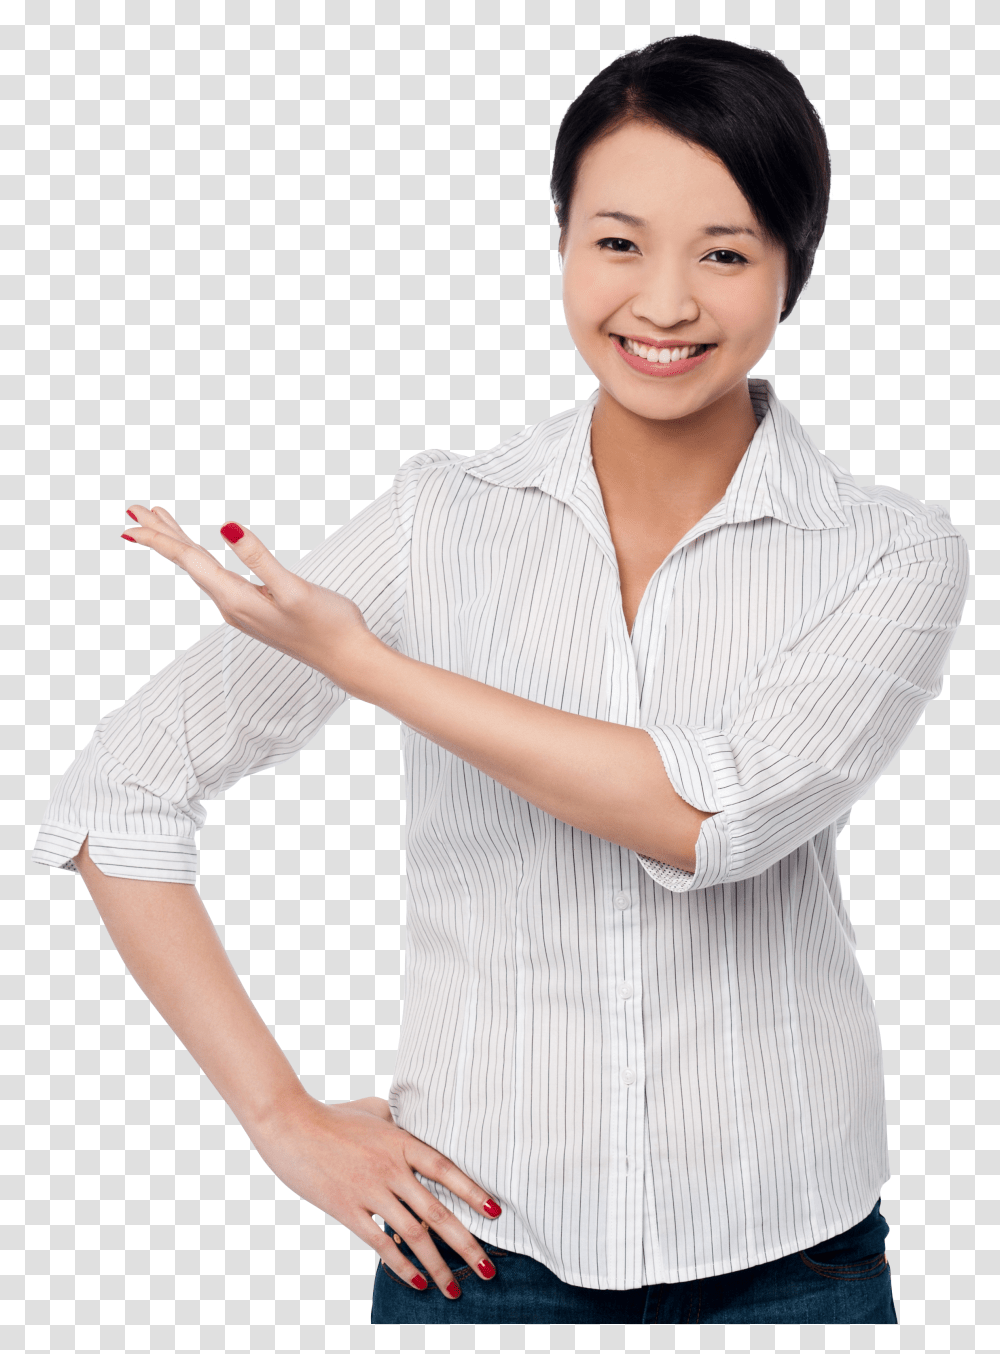 Women Pointing Left Girls Image Pointing The Text Transparent Png